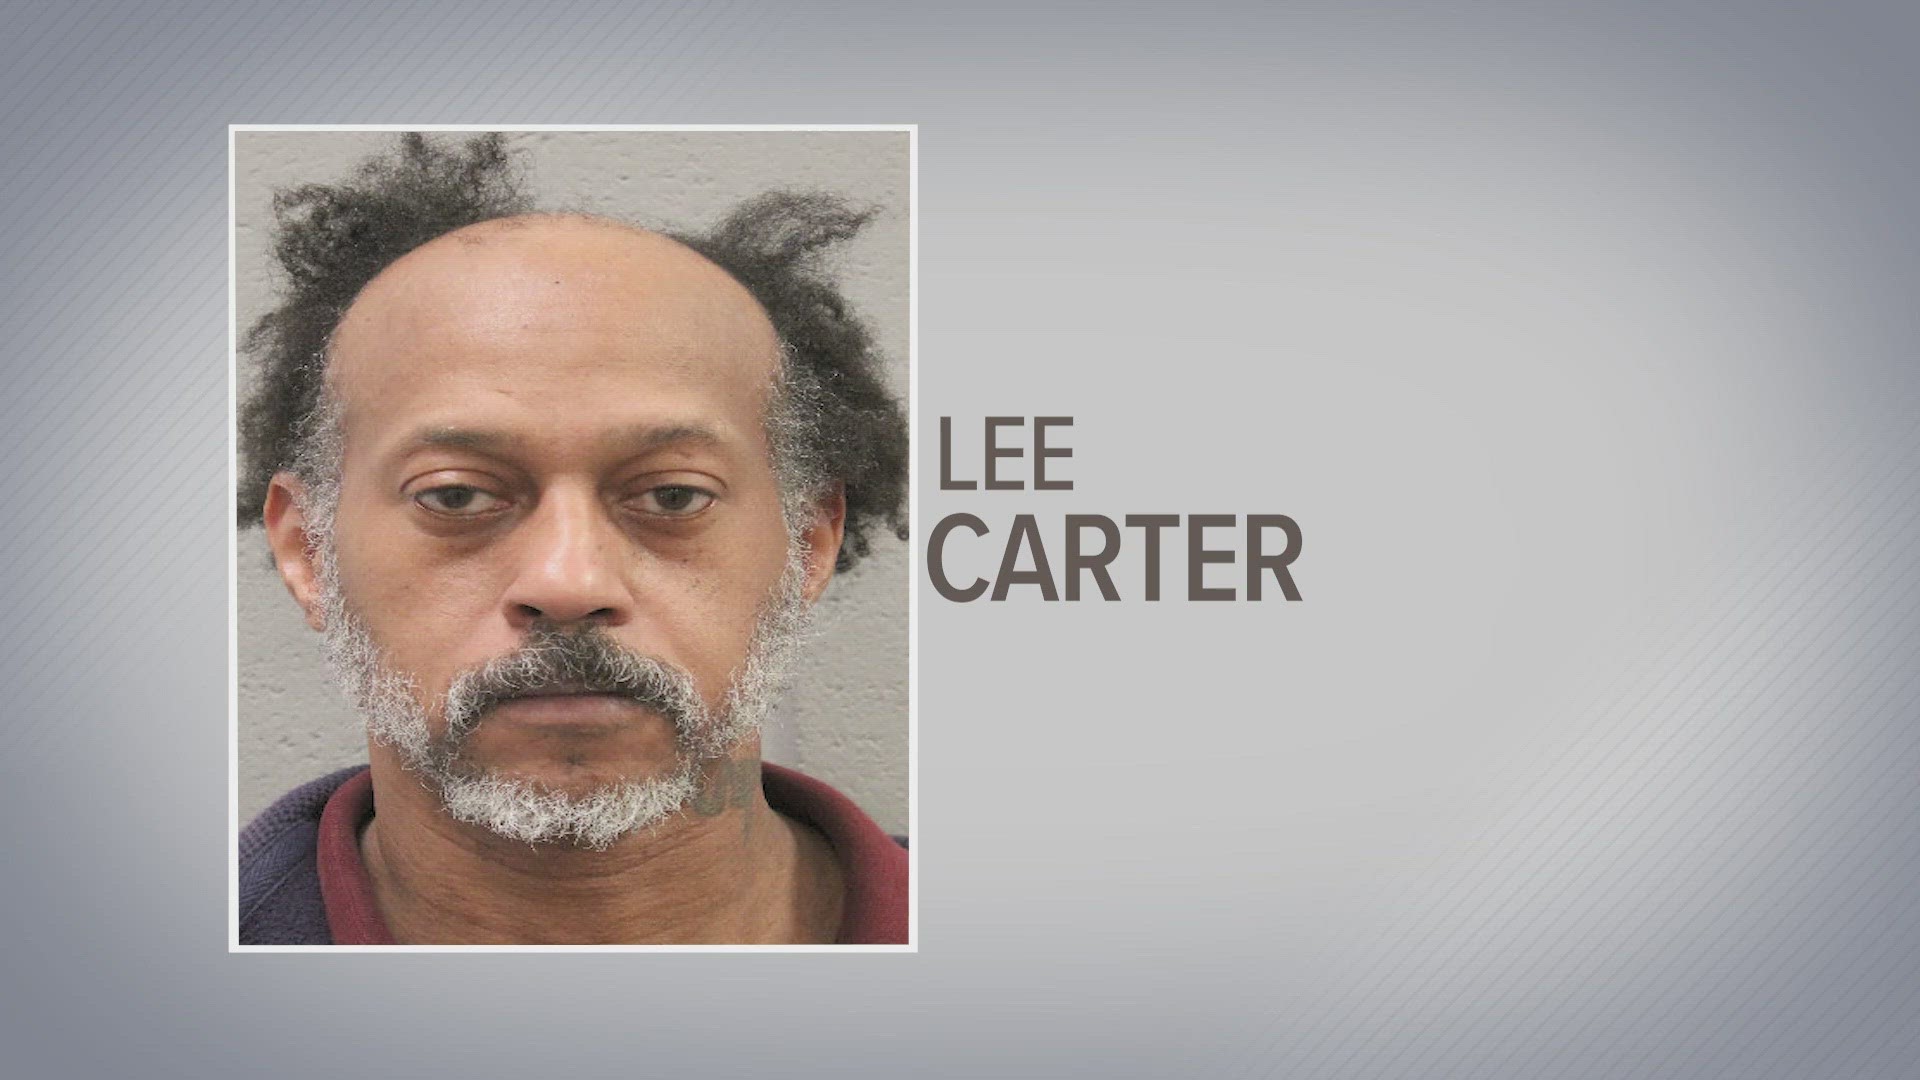 Lee Carter was charged with aggravated kidnapping in April 2023 but wasn't arrested until Jan. 4, 2024. Police have not said why it took so long to arrest him.